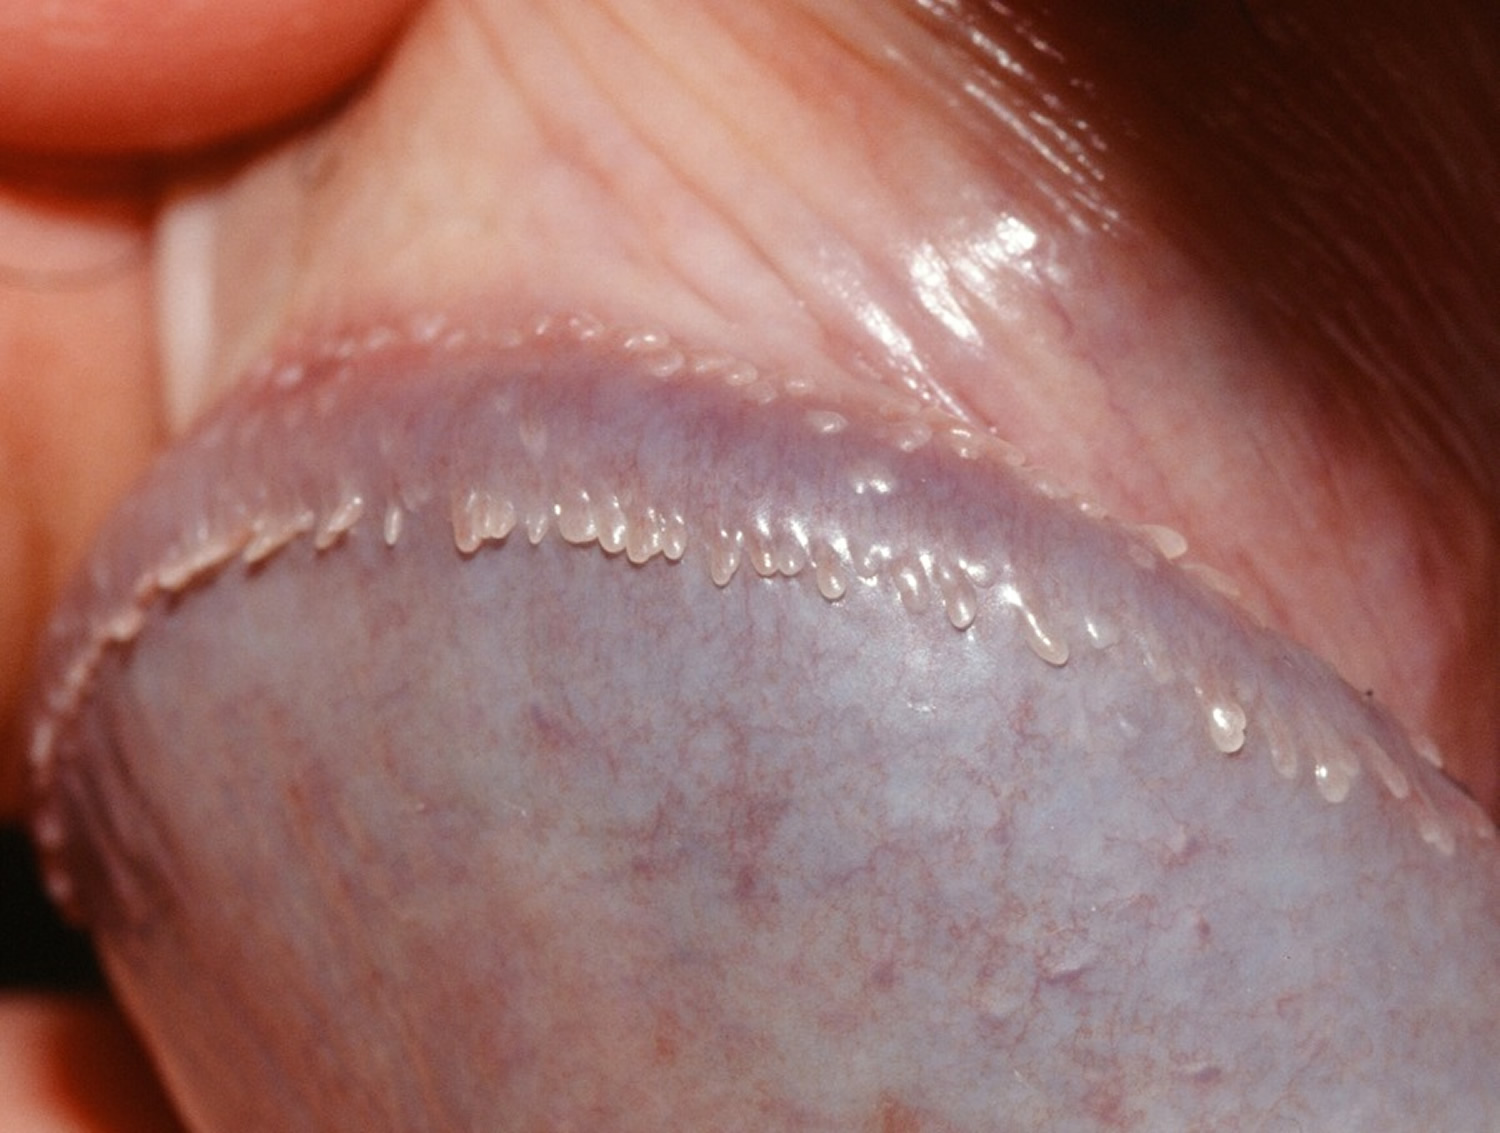 7 causes of pimple-like bumps on your penis, according to doctors